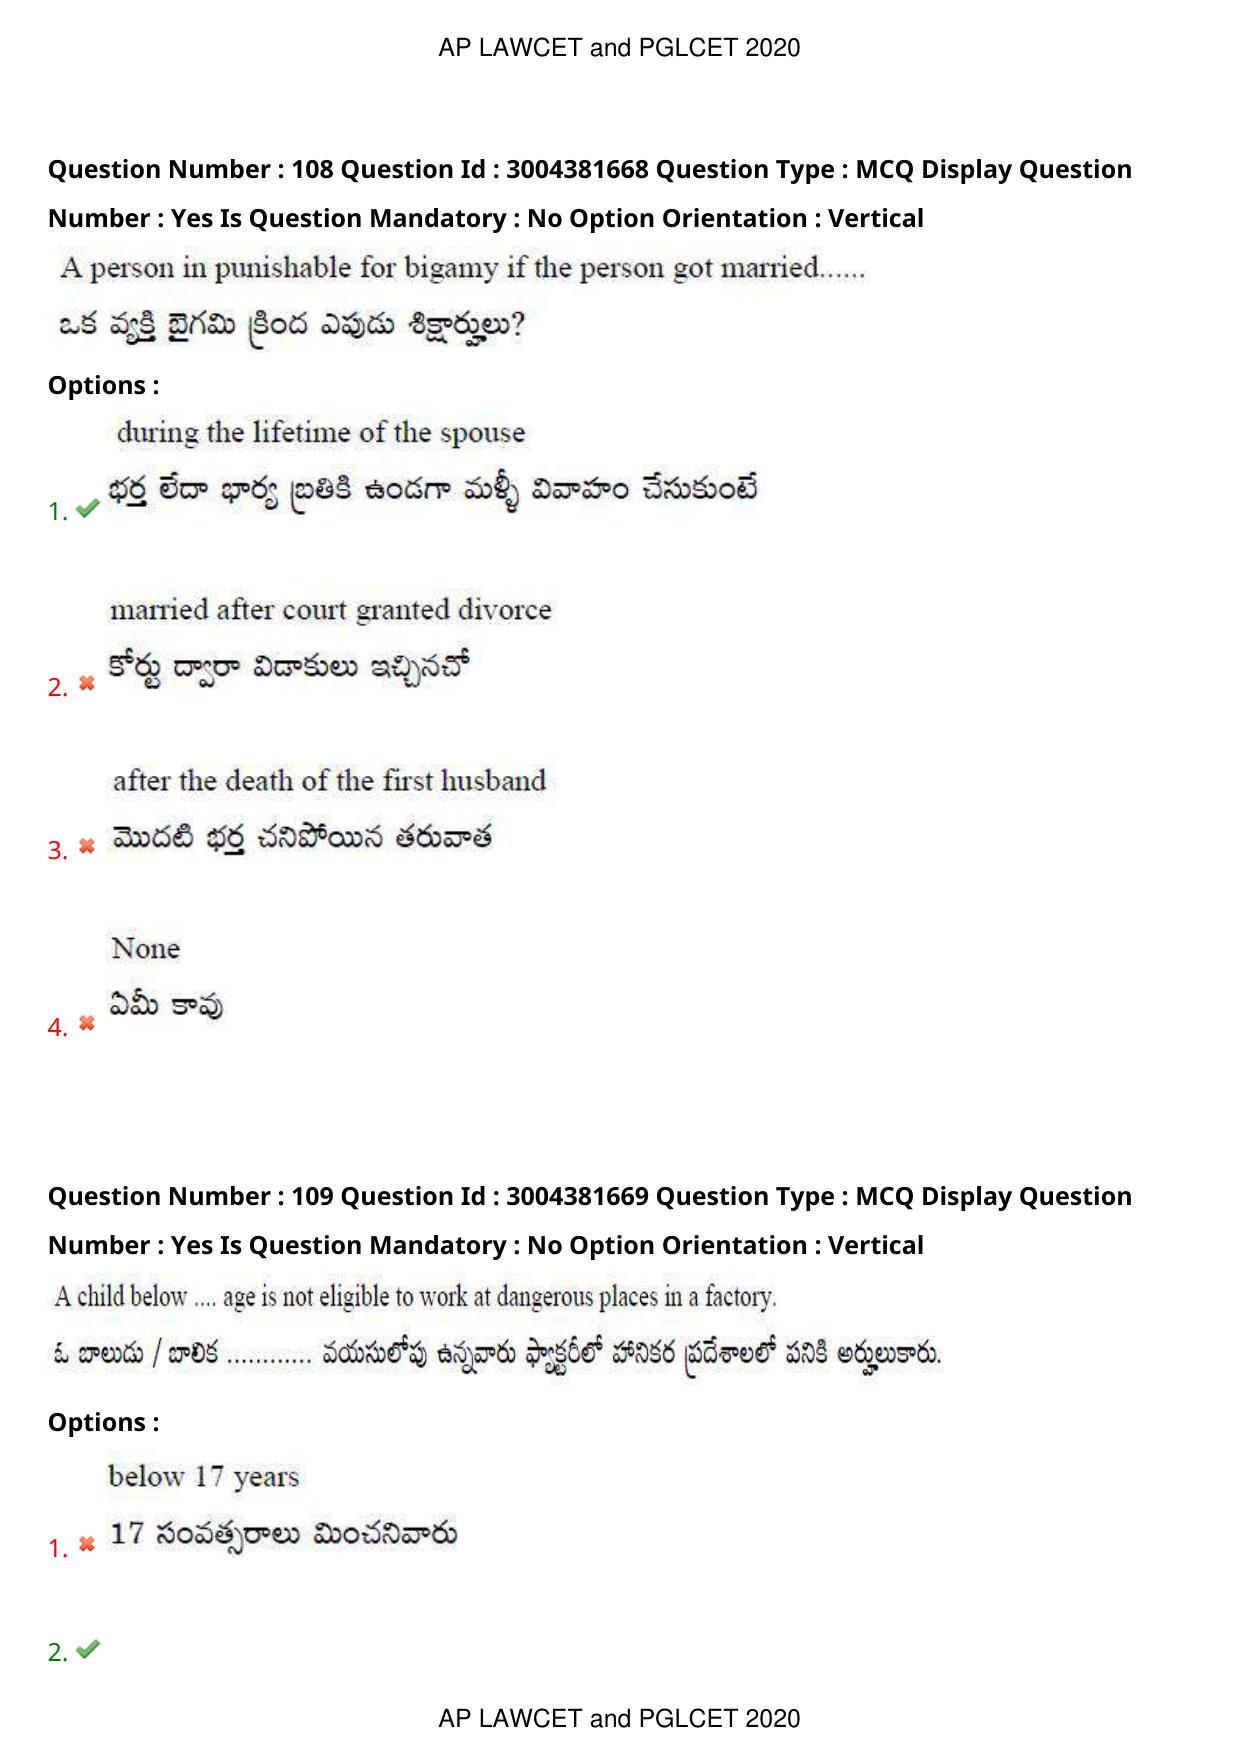 AP LAWCET 2020 - 5 Year LLB Question Paper With Keys - Page 71